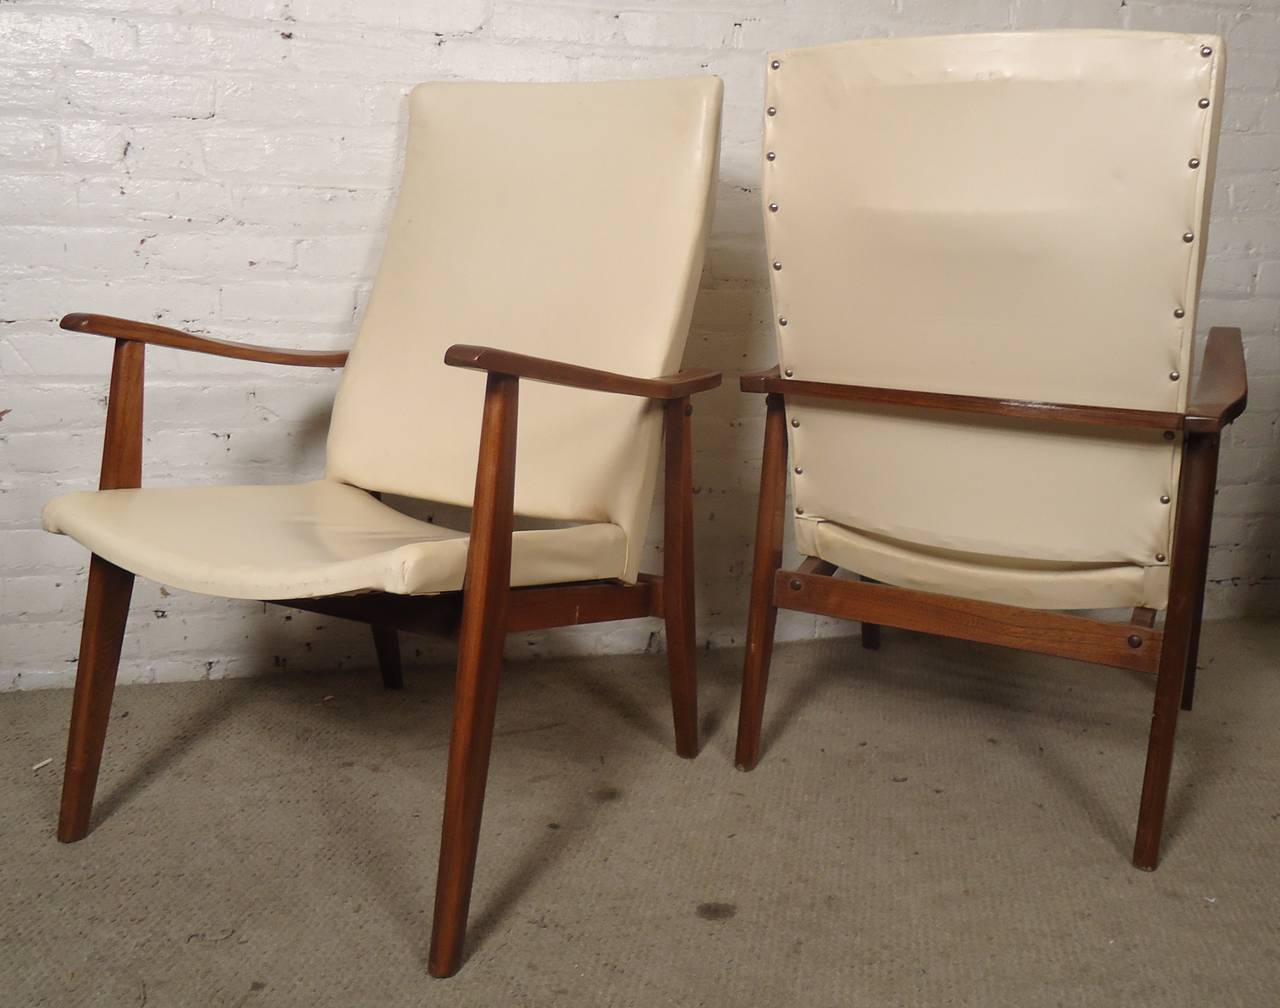 Vintage-Modern pair of Danish arm chairs, each featuring upholstered back and seat with beautifully sculpted teak legs and arm rests.

(Please confirm item location - NY or NJ - with dealer)